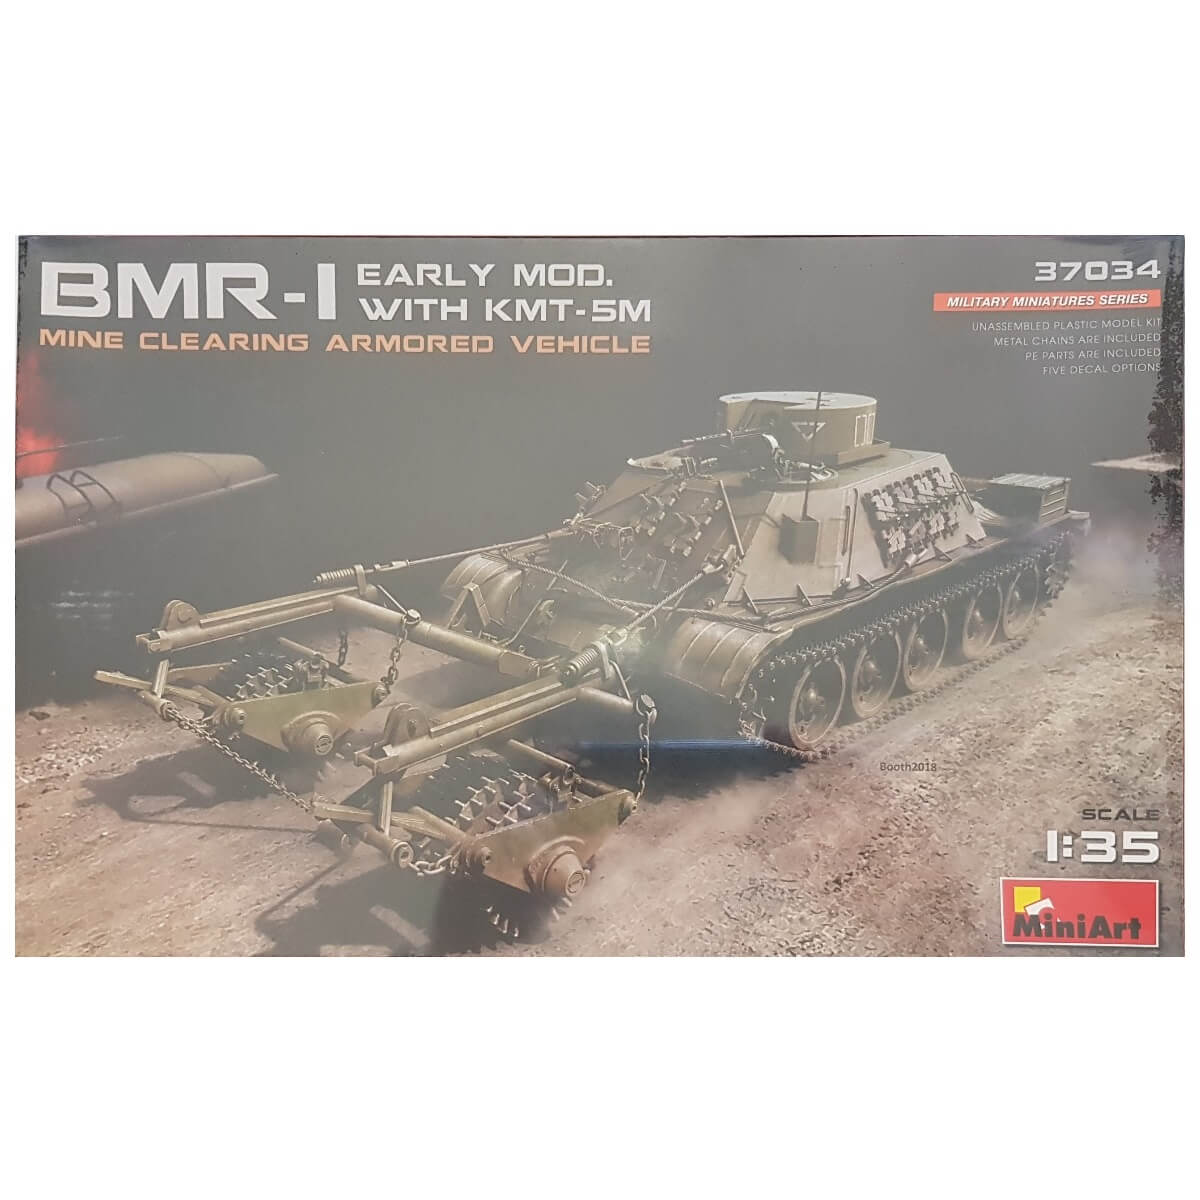 1:35 BMR-1 Early Mod. with KMT-5M - MINIART